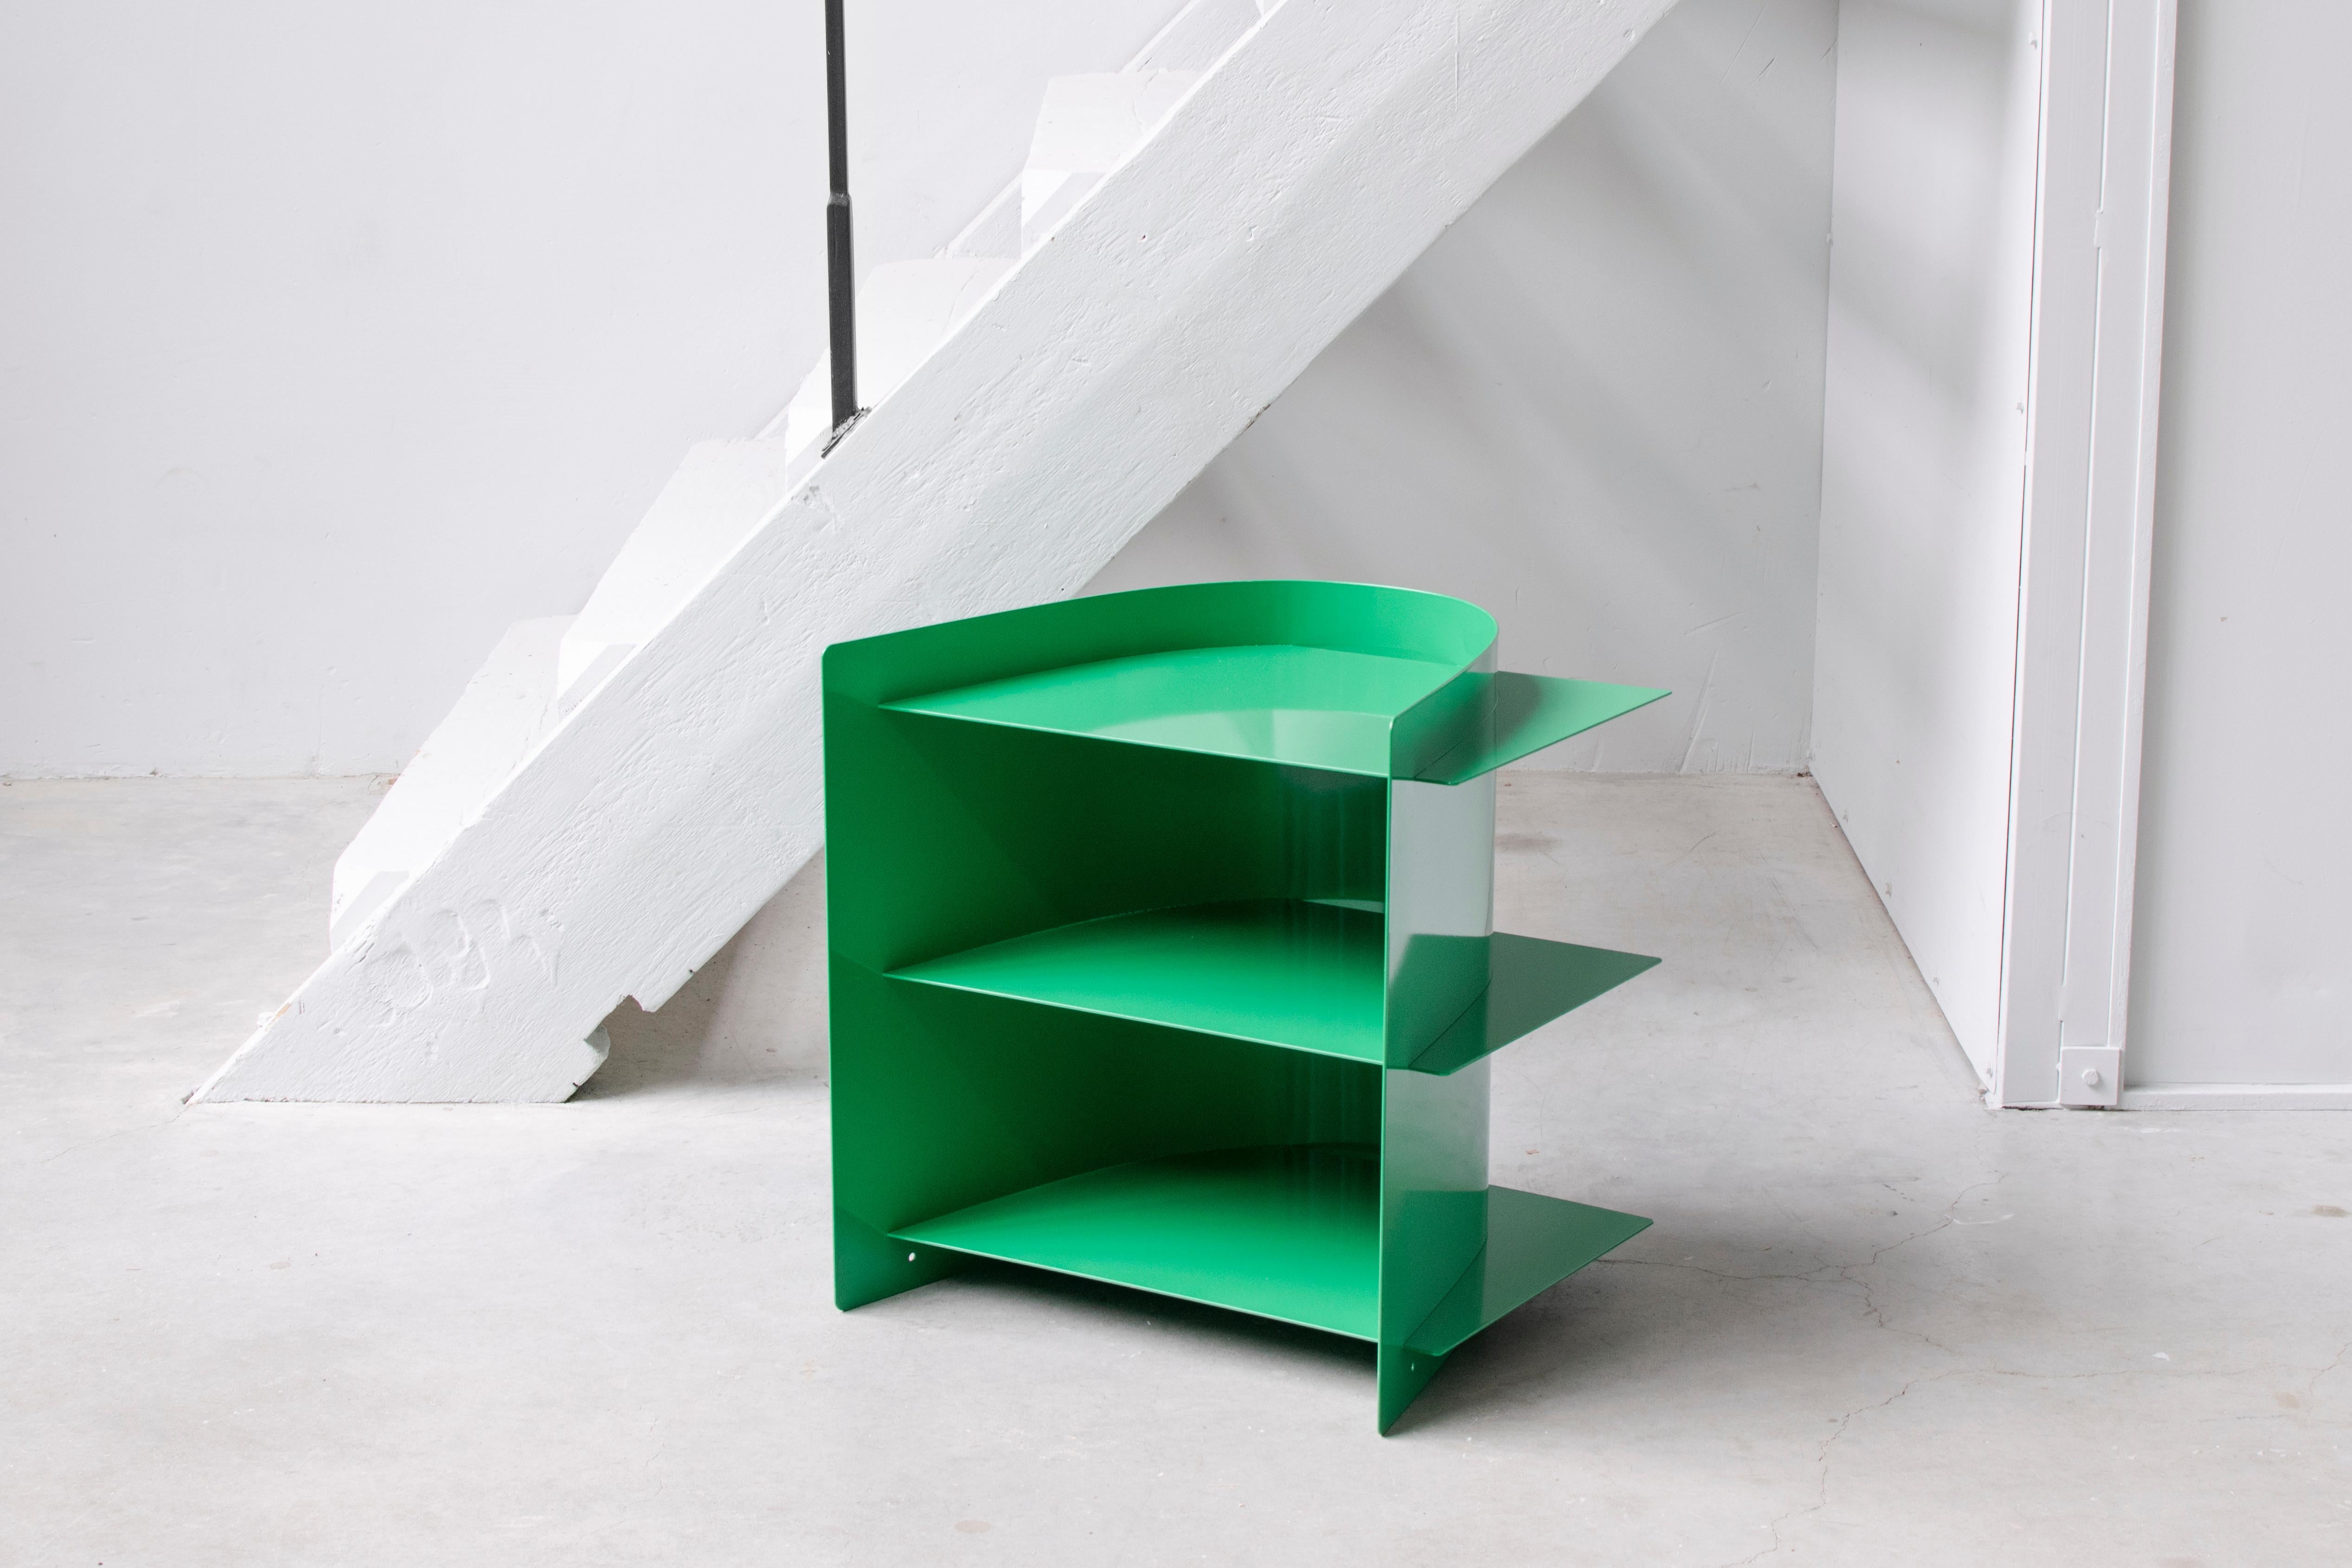 Iridescent Tension Side Table, Paul Coenen 2